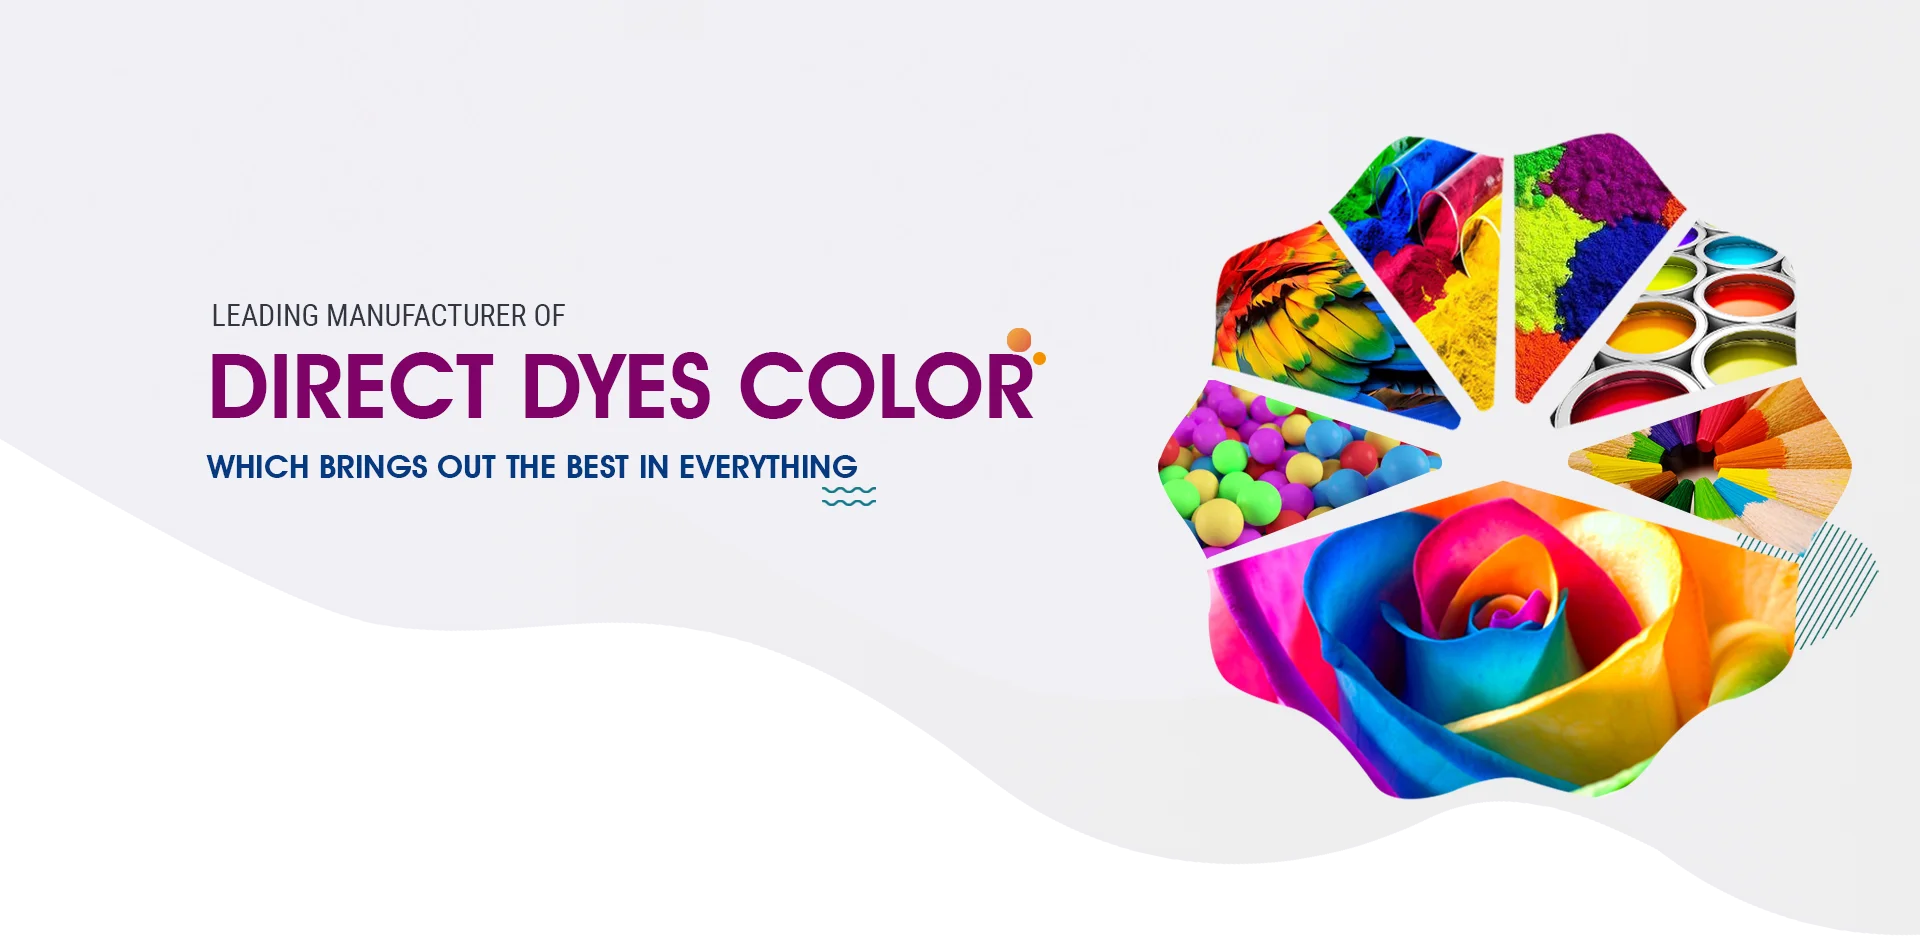 DIRECT DYES COLOR